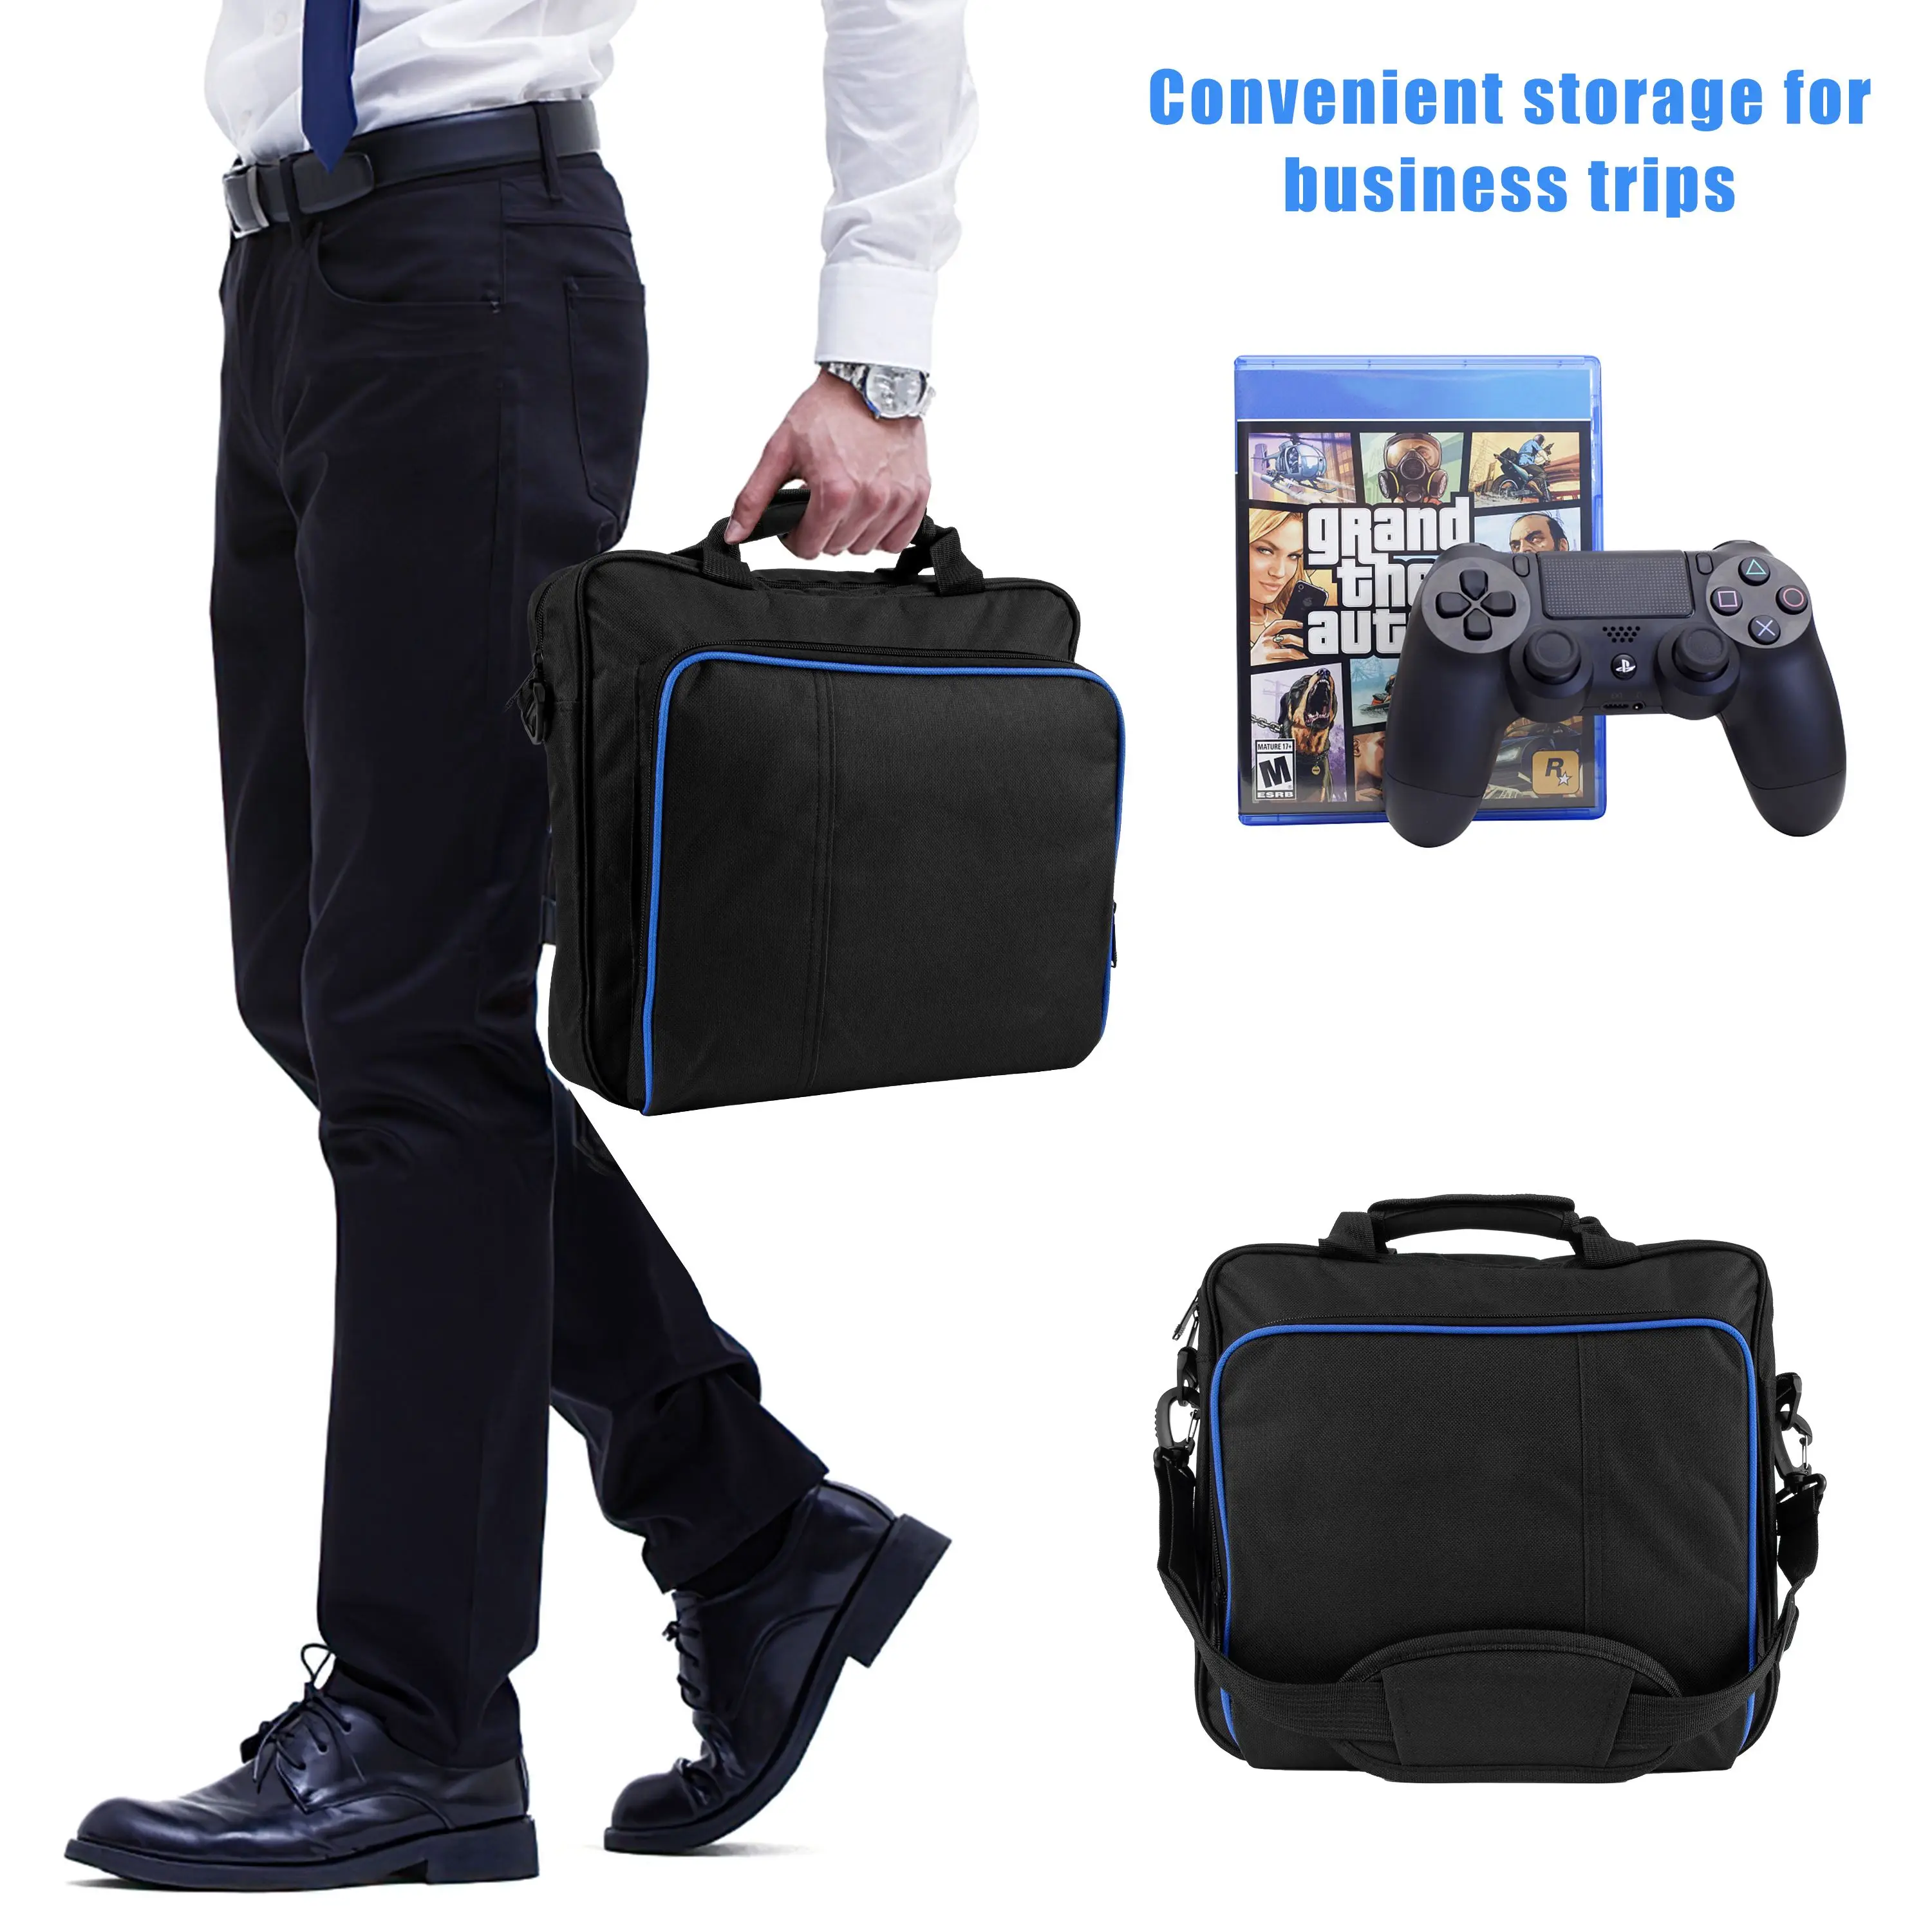 

Game Sytem Bag Multifunctional Carry Bag Fit For Sony PlayStation 4 PS4 Console Handbag Travel Case